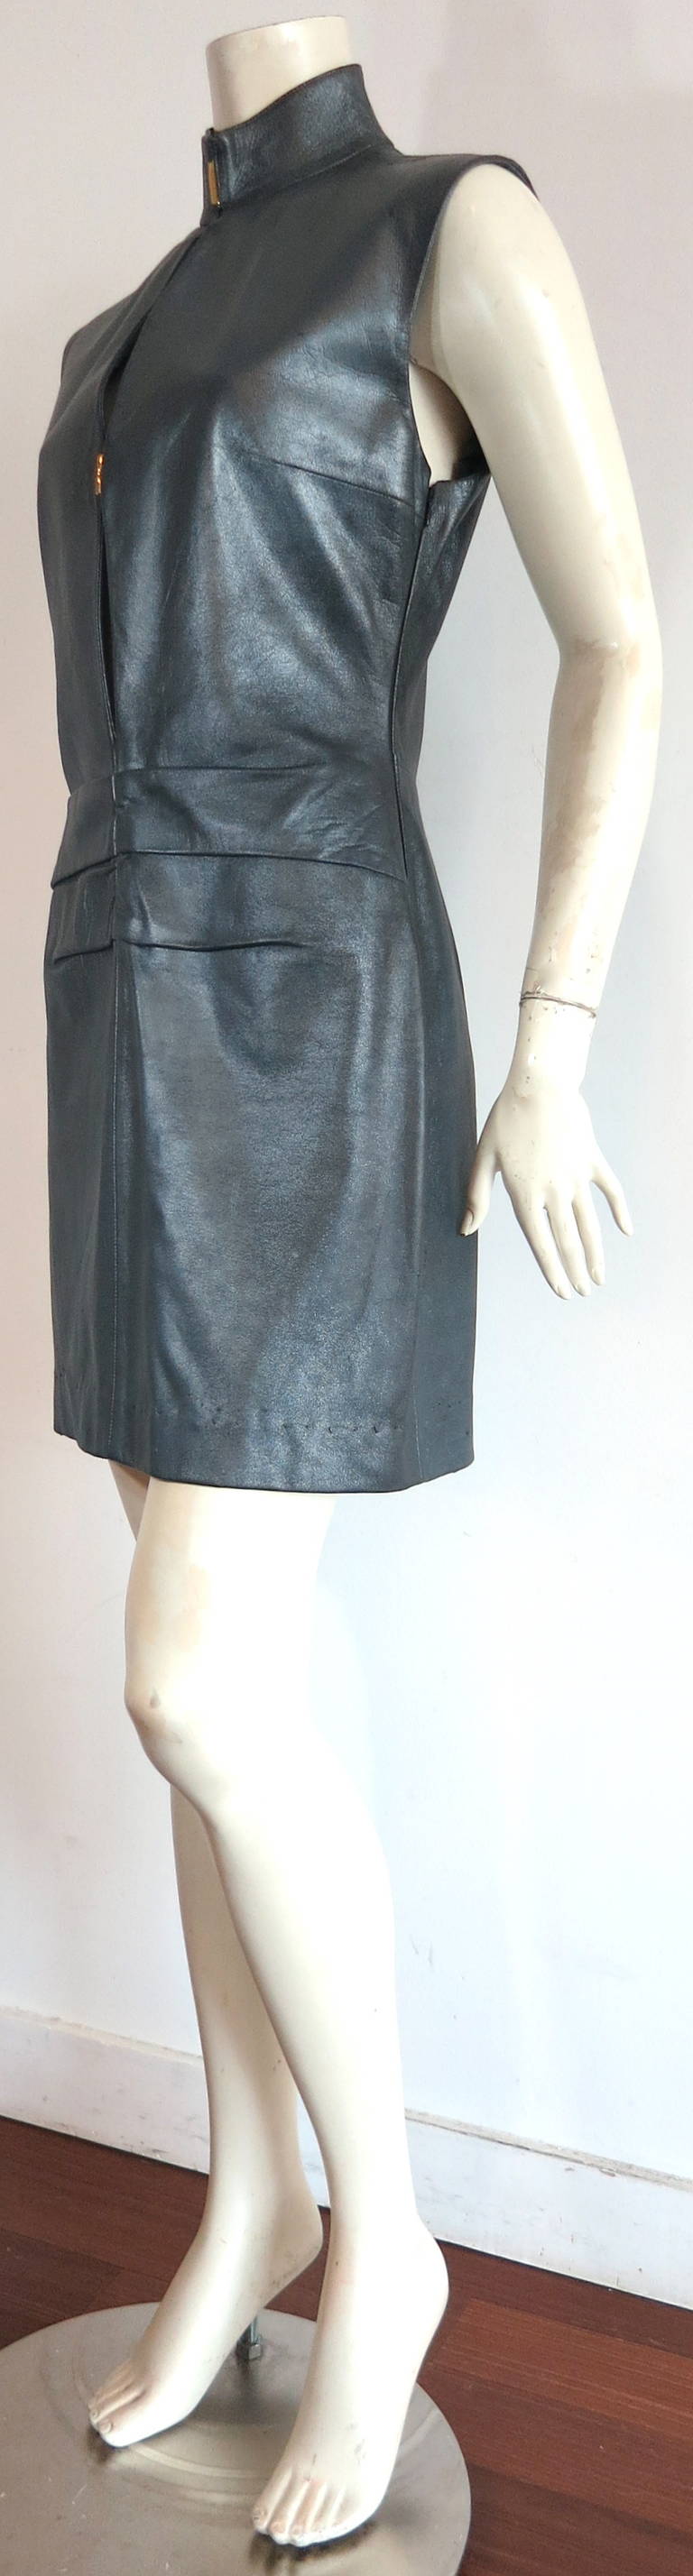 1990s YVES SAINT LAURENT Gunmetal leather dress In Fair Condition For Sale In Newport Beach, CA